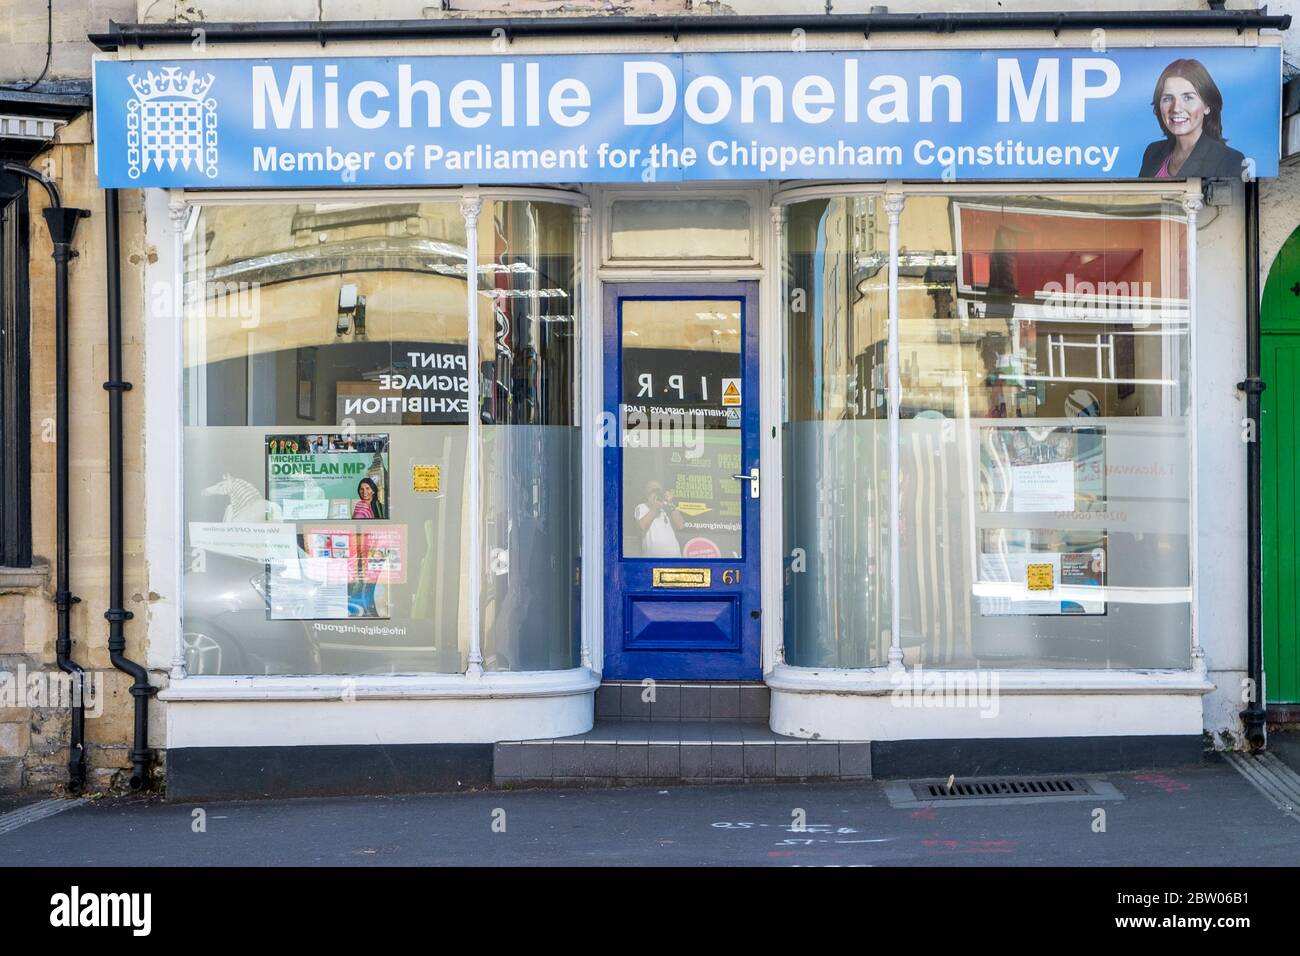 Chippenham, Wiltshire UK, 28th May, 2020. As Boris Johnson faces growing anger over Dominic Cummings, anti tory stickers are pictured on the window of the Constituency Office of Michelle Donelan the conservative MP for the Chippenham Constituency. Credit: Lynchpics/Alamy Live News Stock Photo